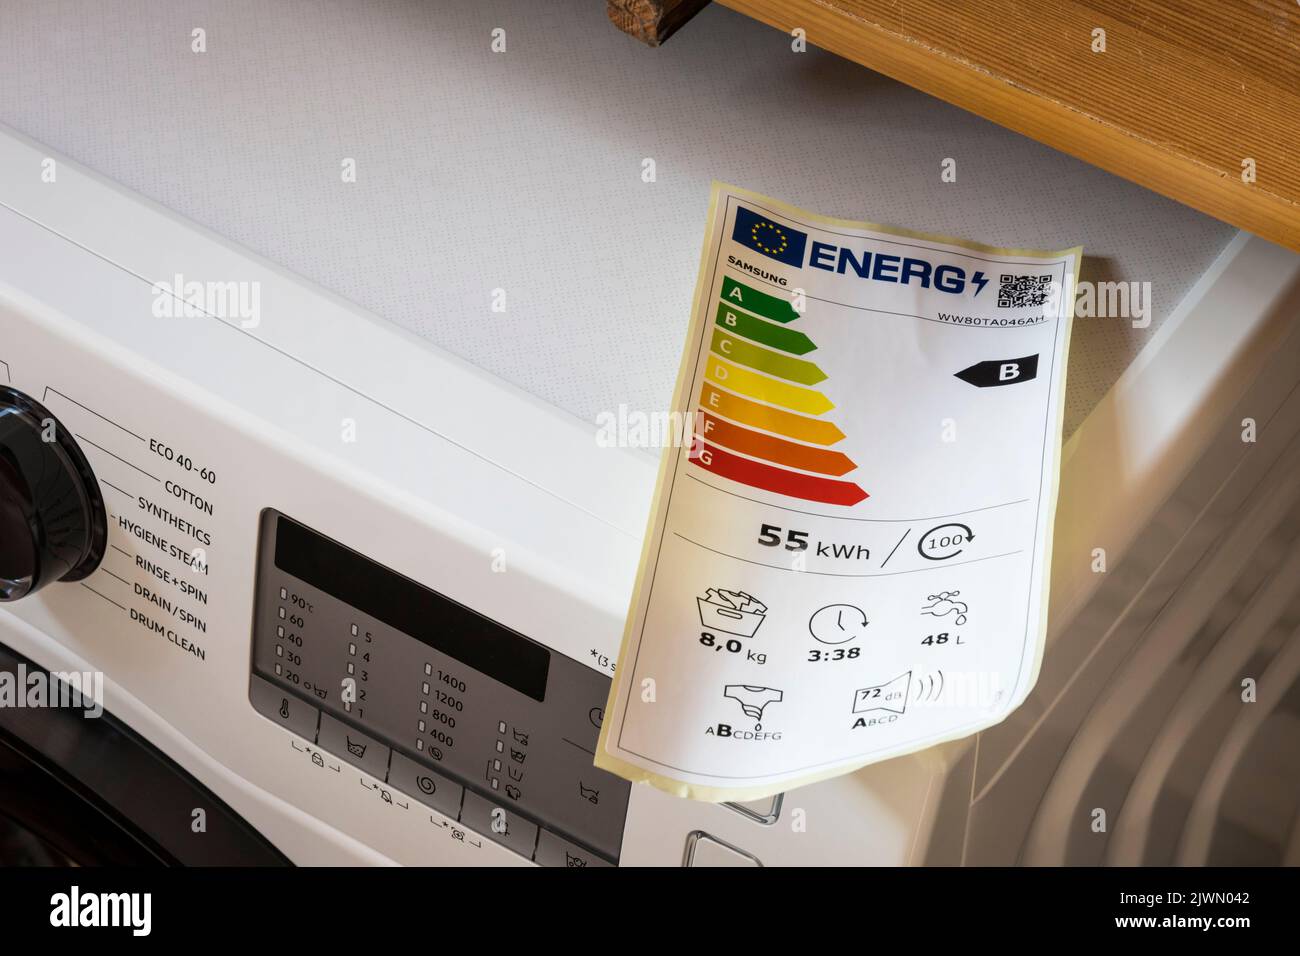 A Samsung washing machine with label showing new energy ratings, introduced in March 2021. Stock Photo